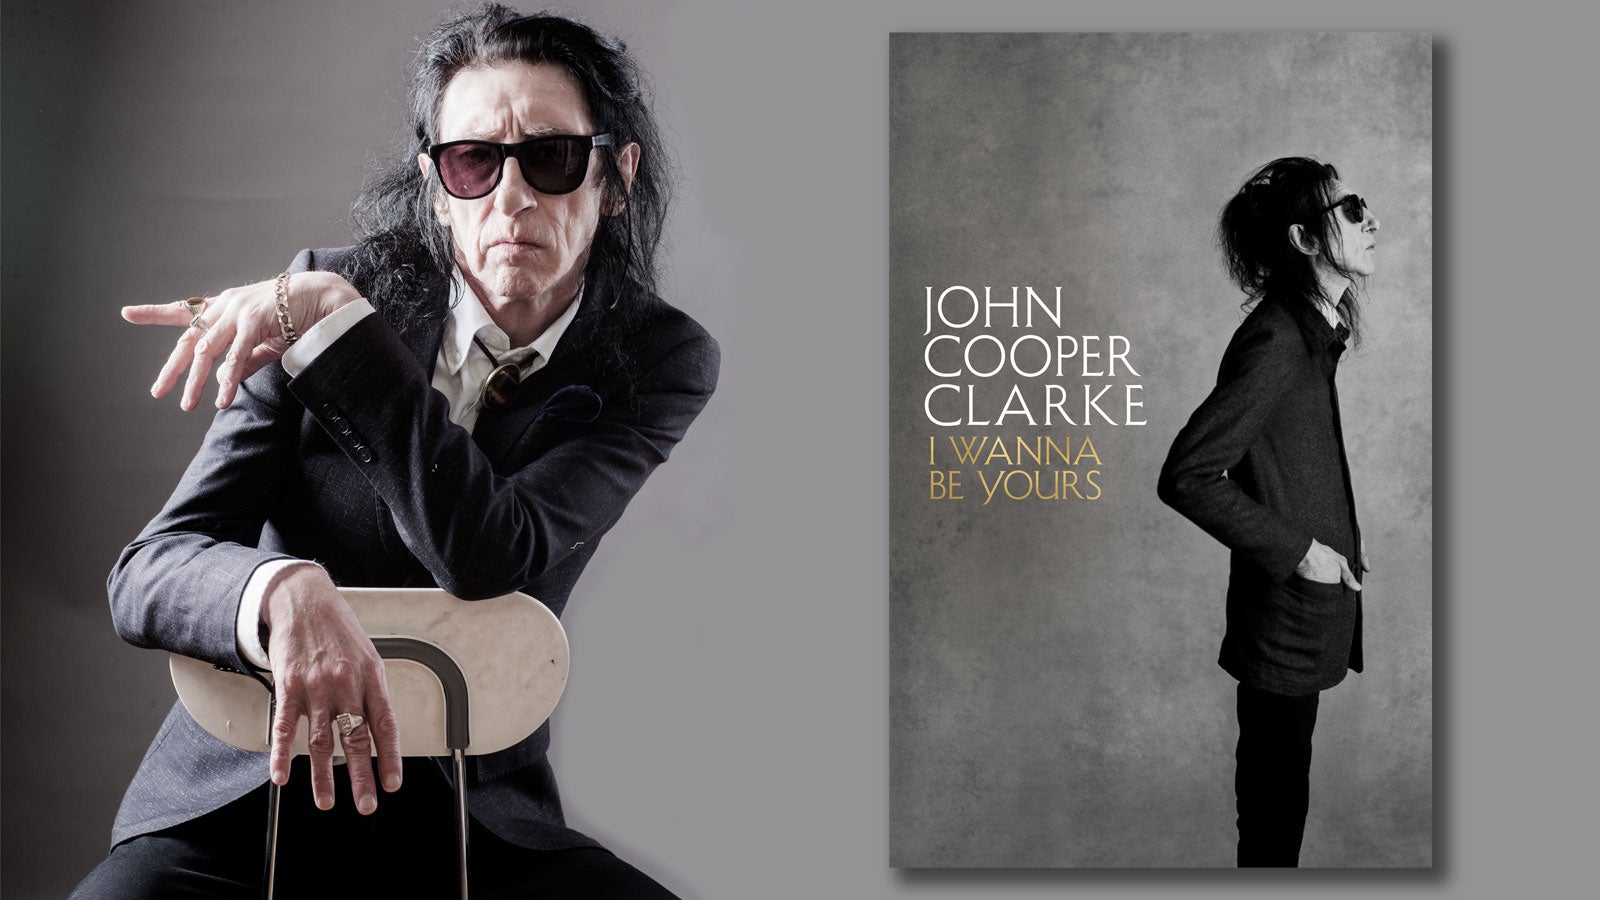 John Cooper Clarke and the I Wanna Be Yours book cover